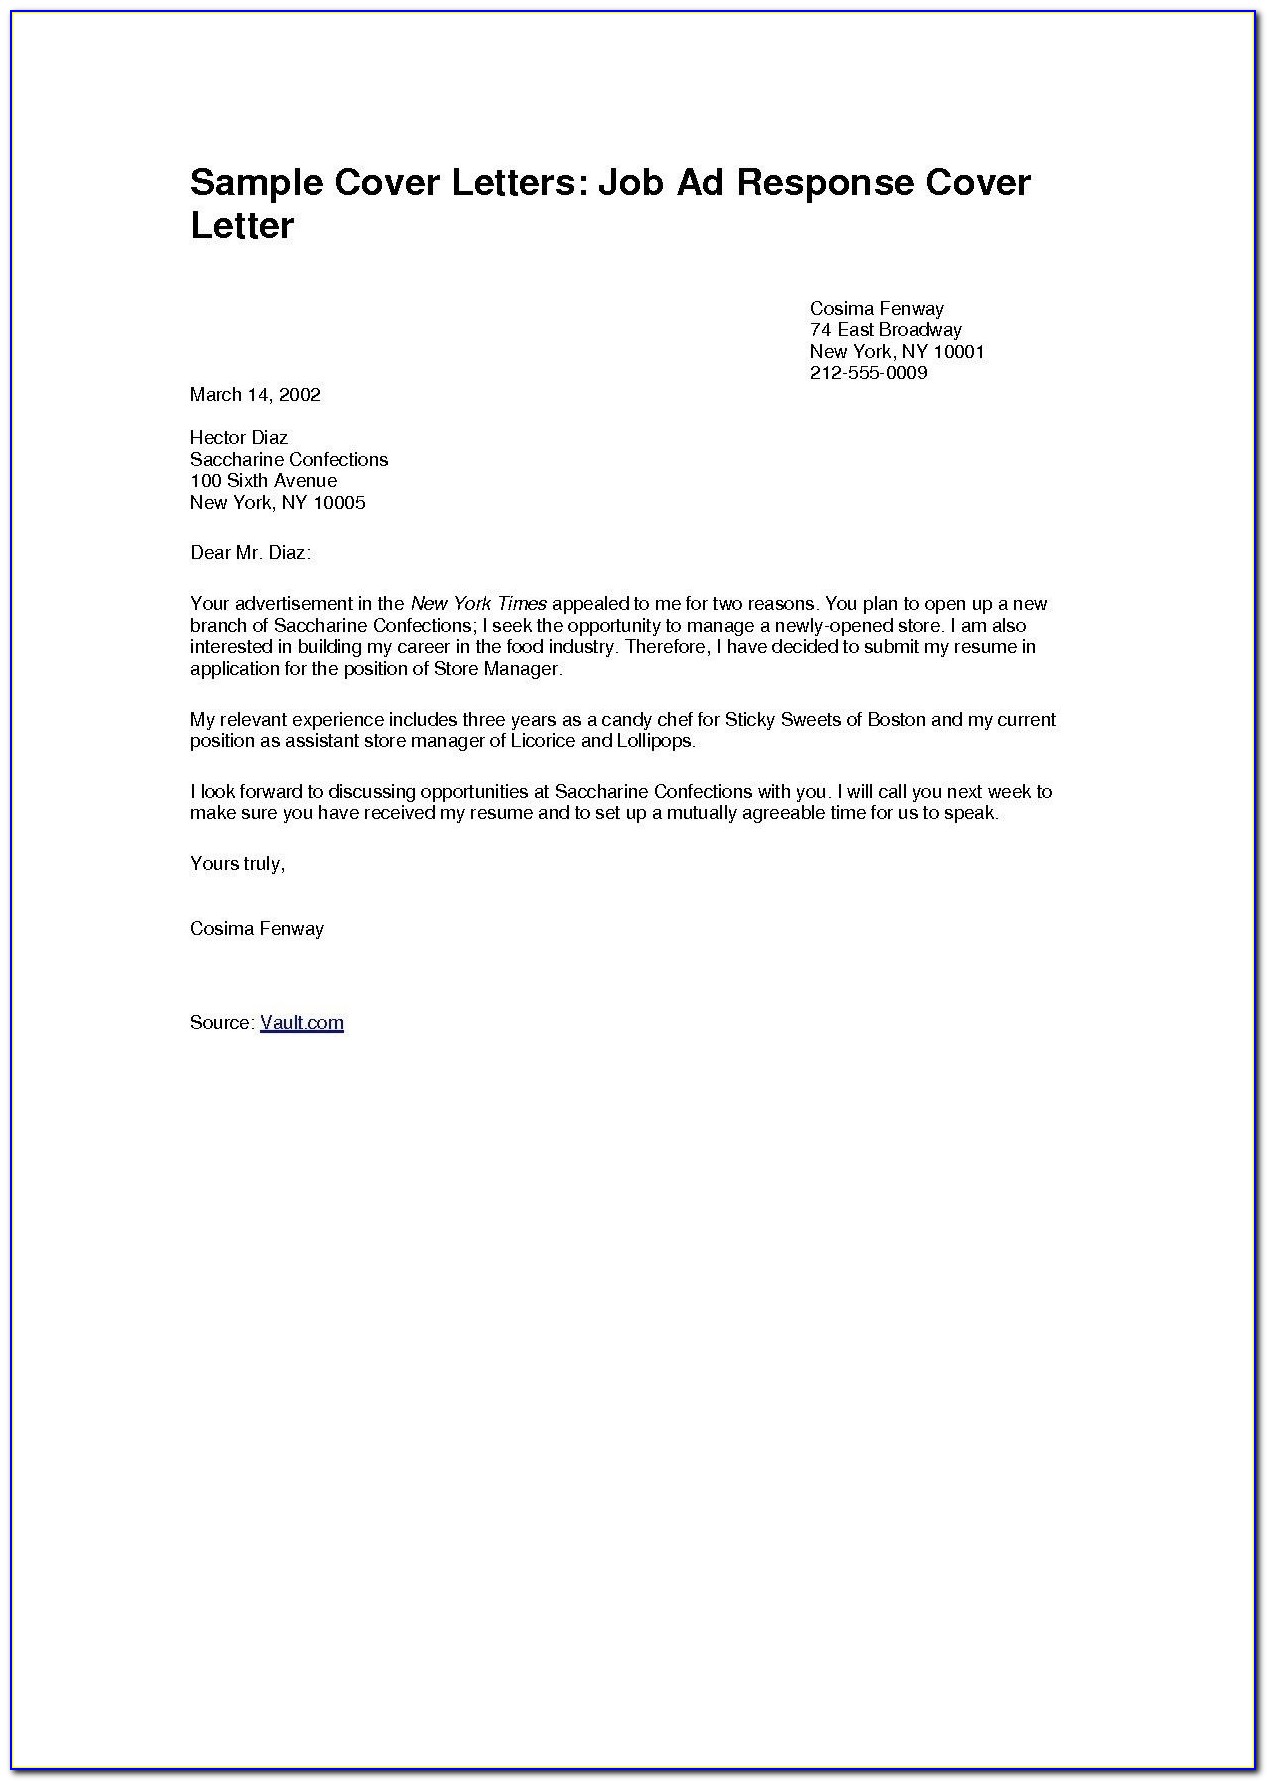 Free Sample Cover Letter For Job Application Word Format